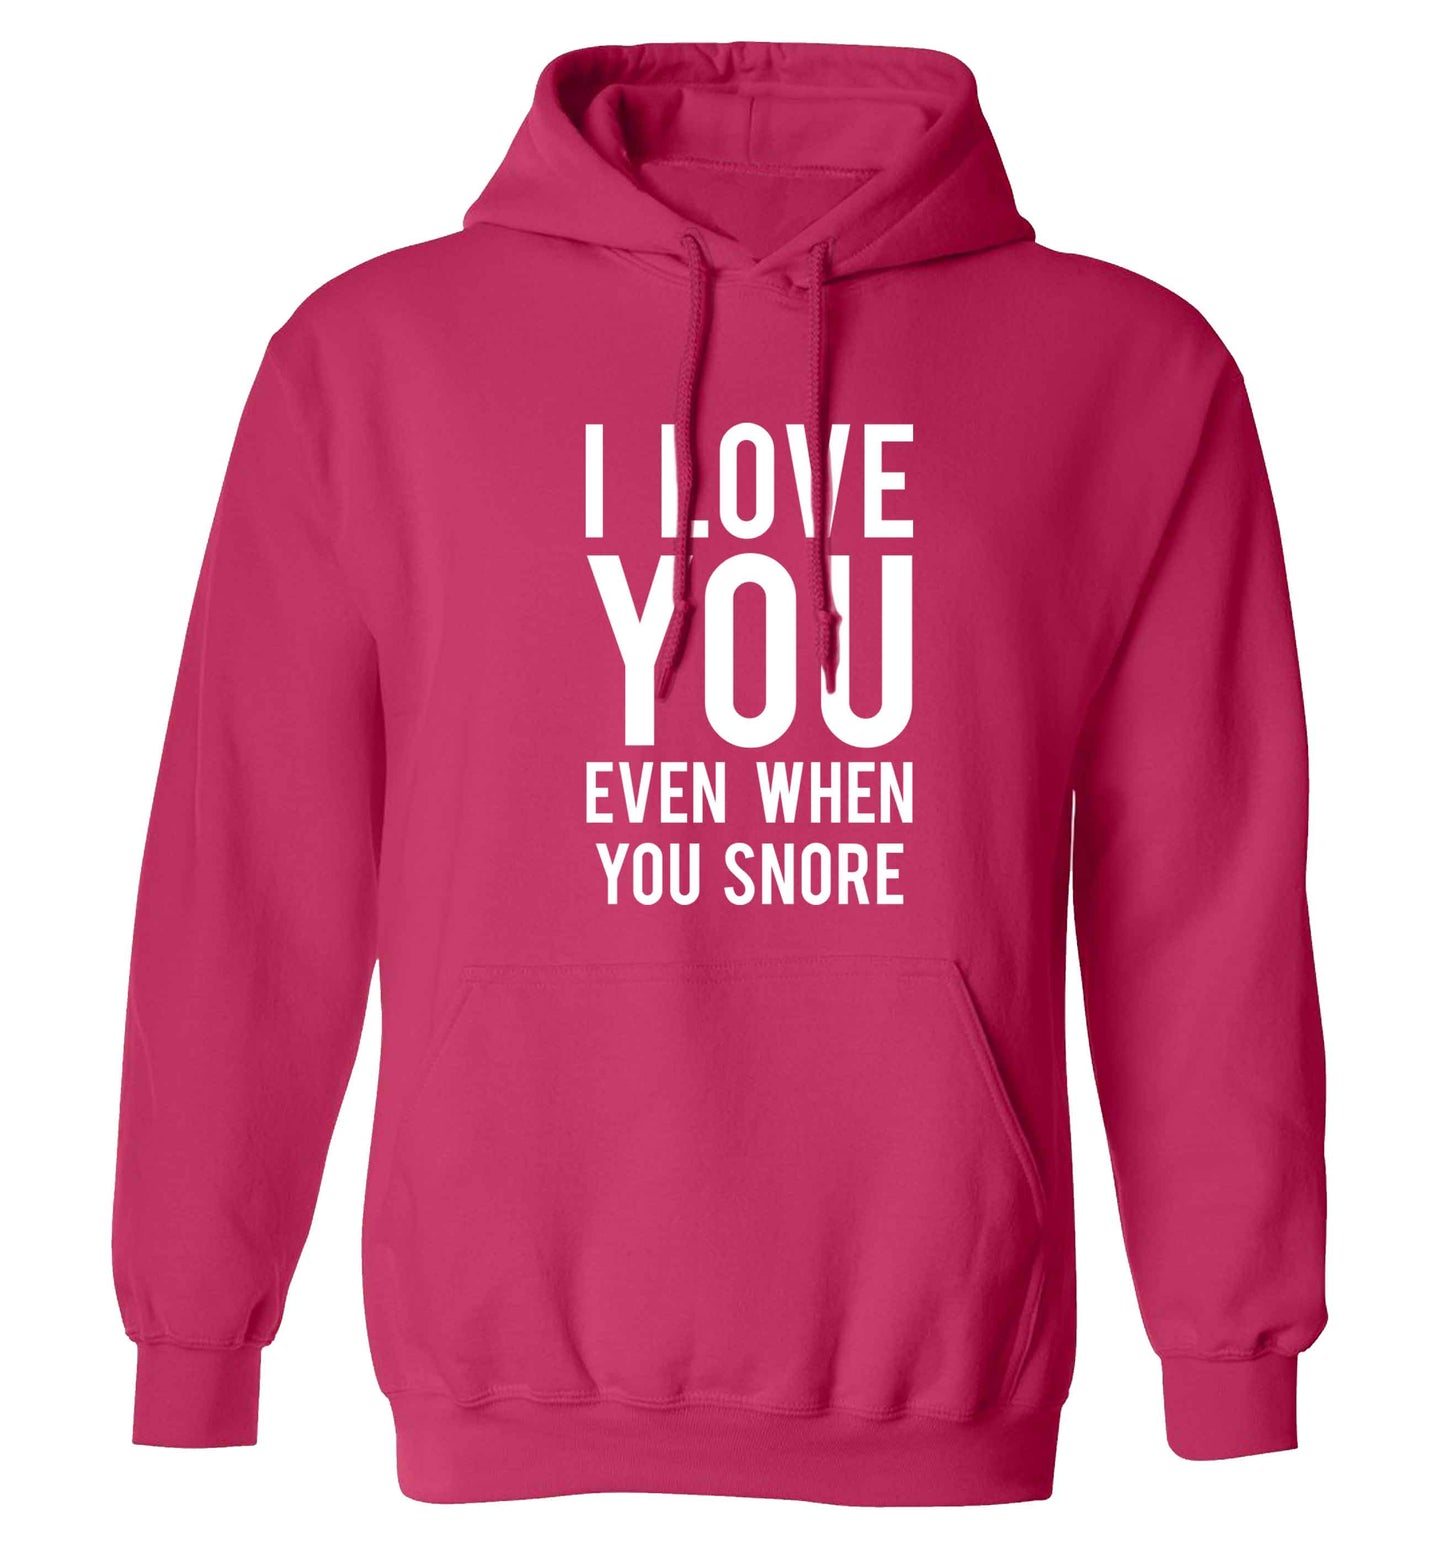 I love you even when you snore adults unisex pink hoodie 2XL